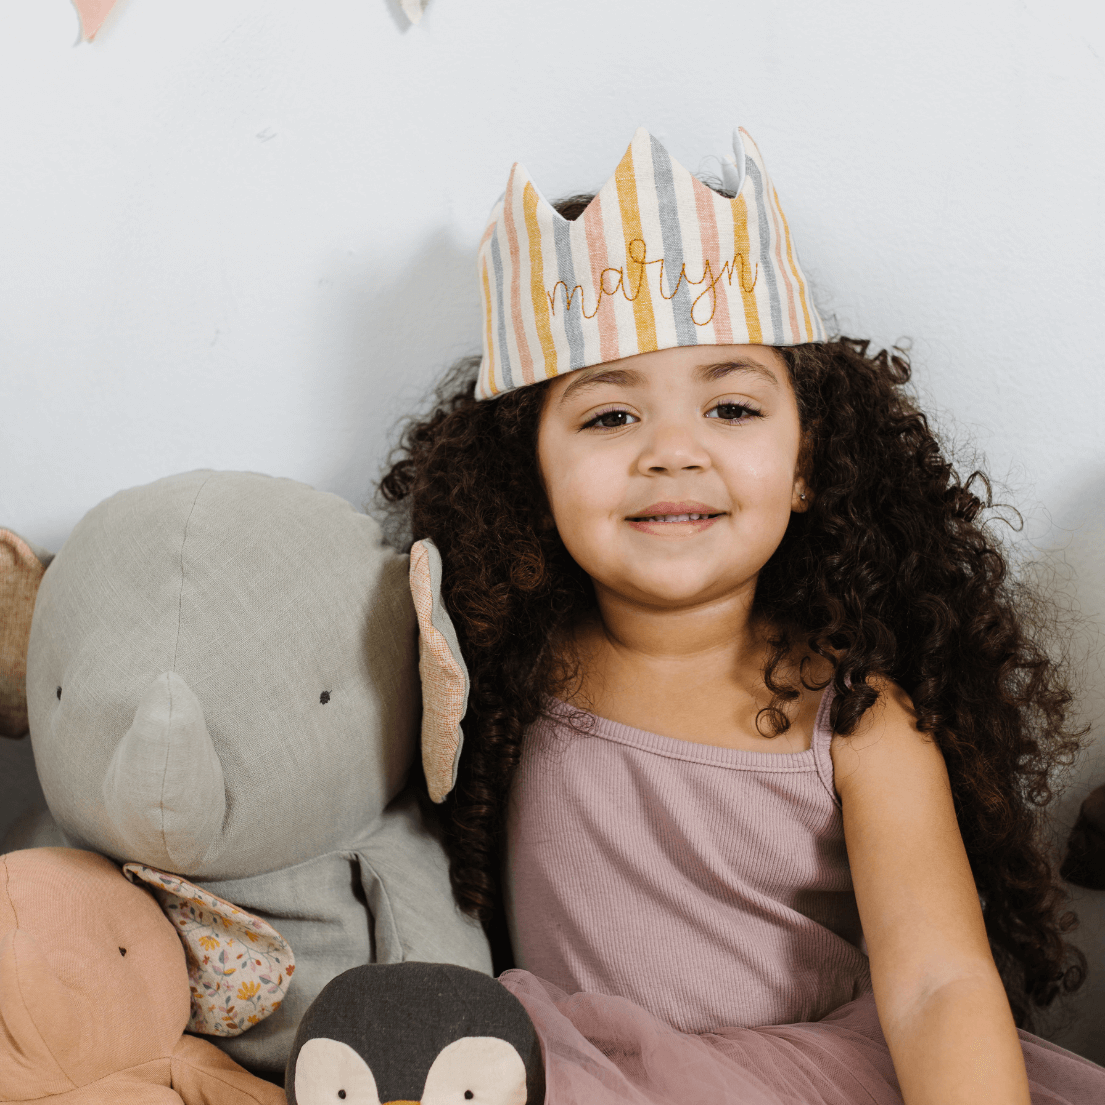 Striped Birthday Crown | "This crown is simply adorable."